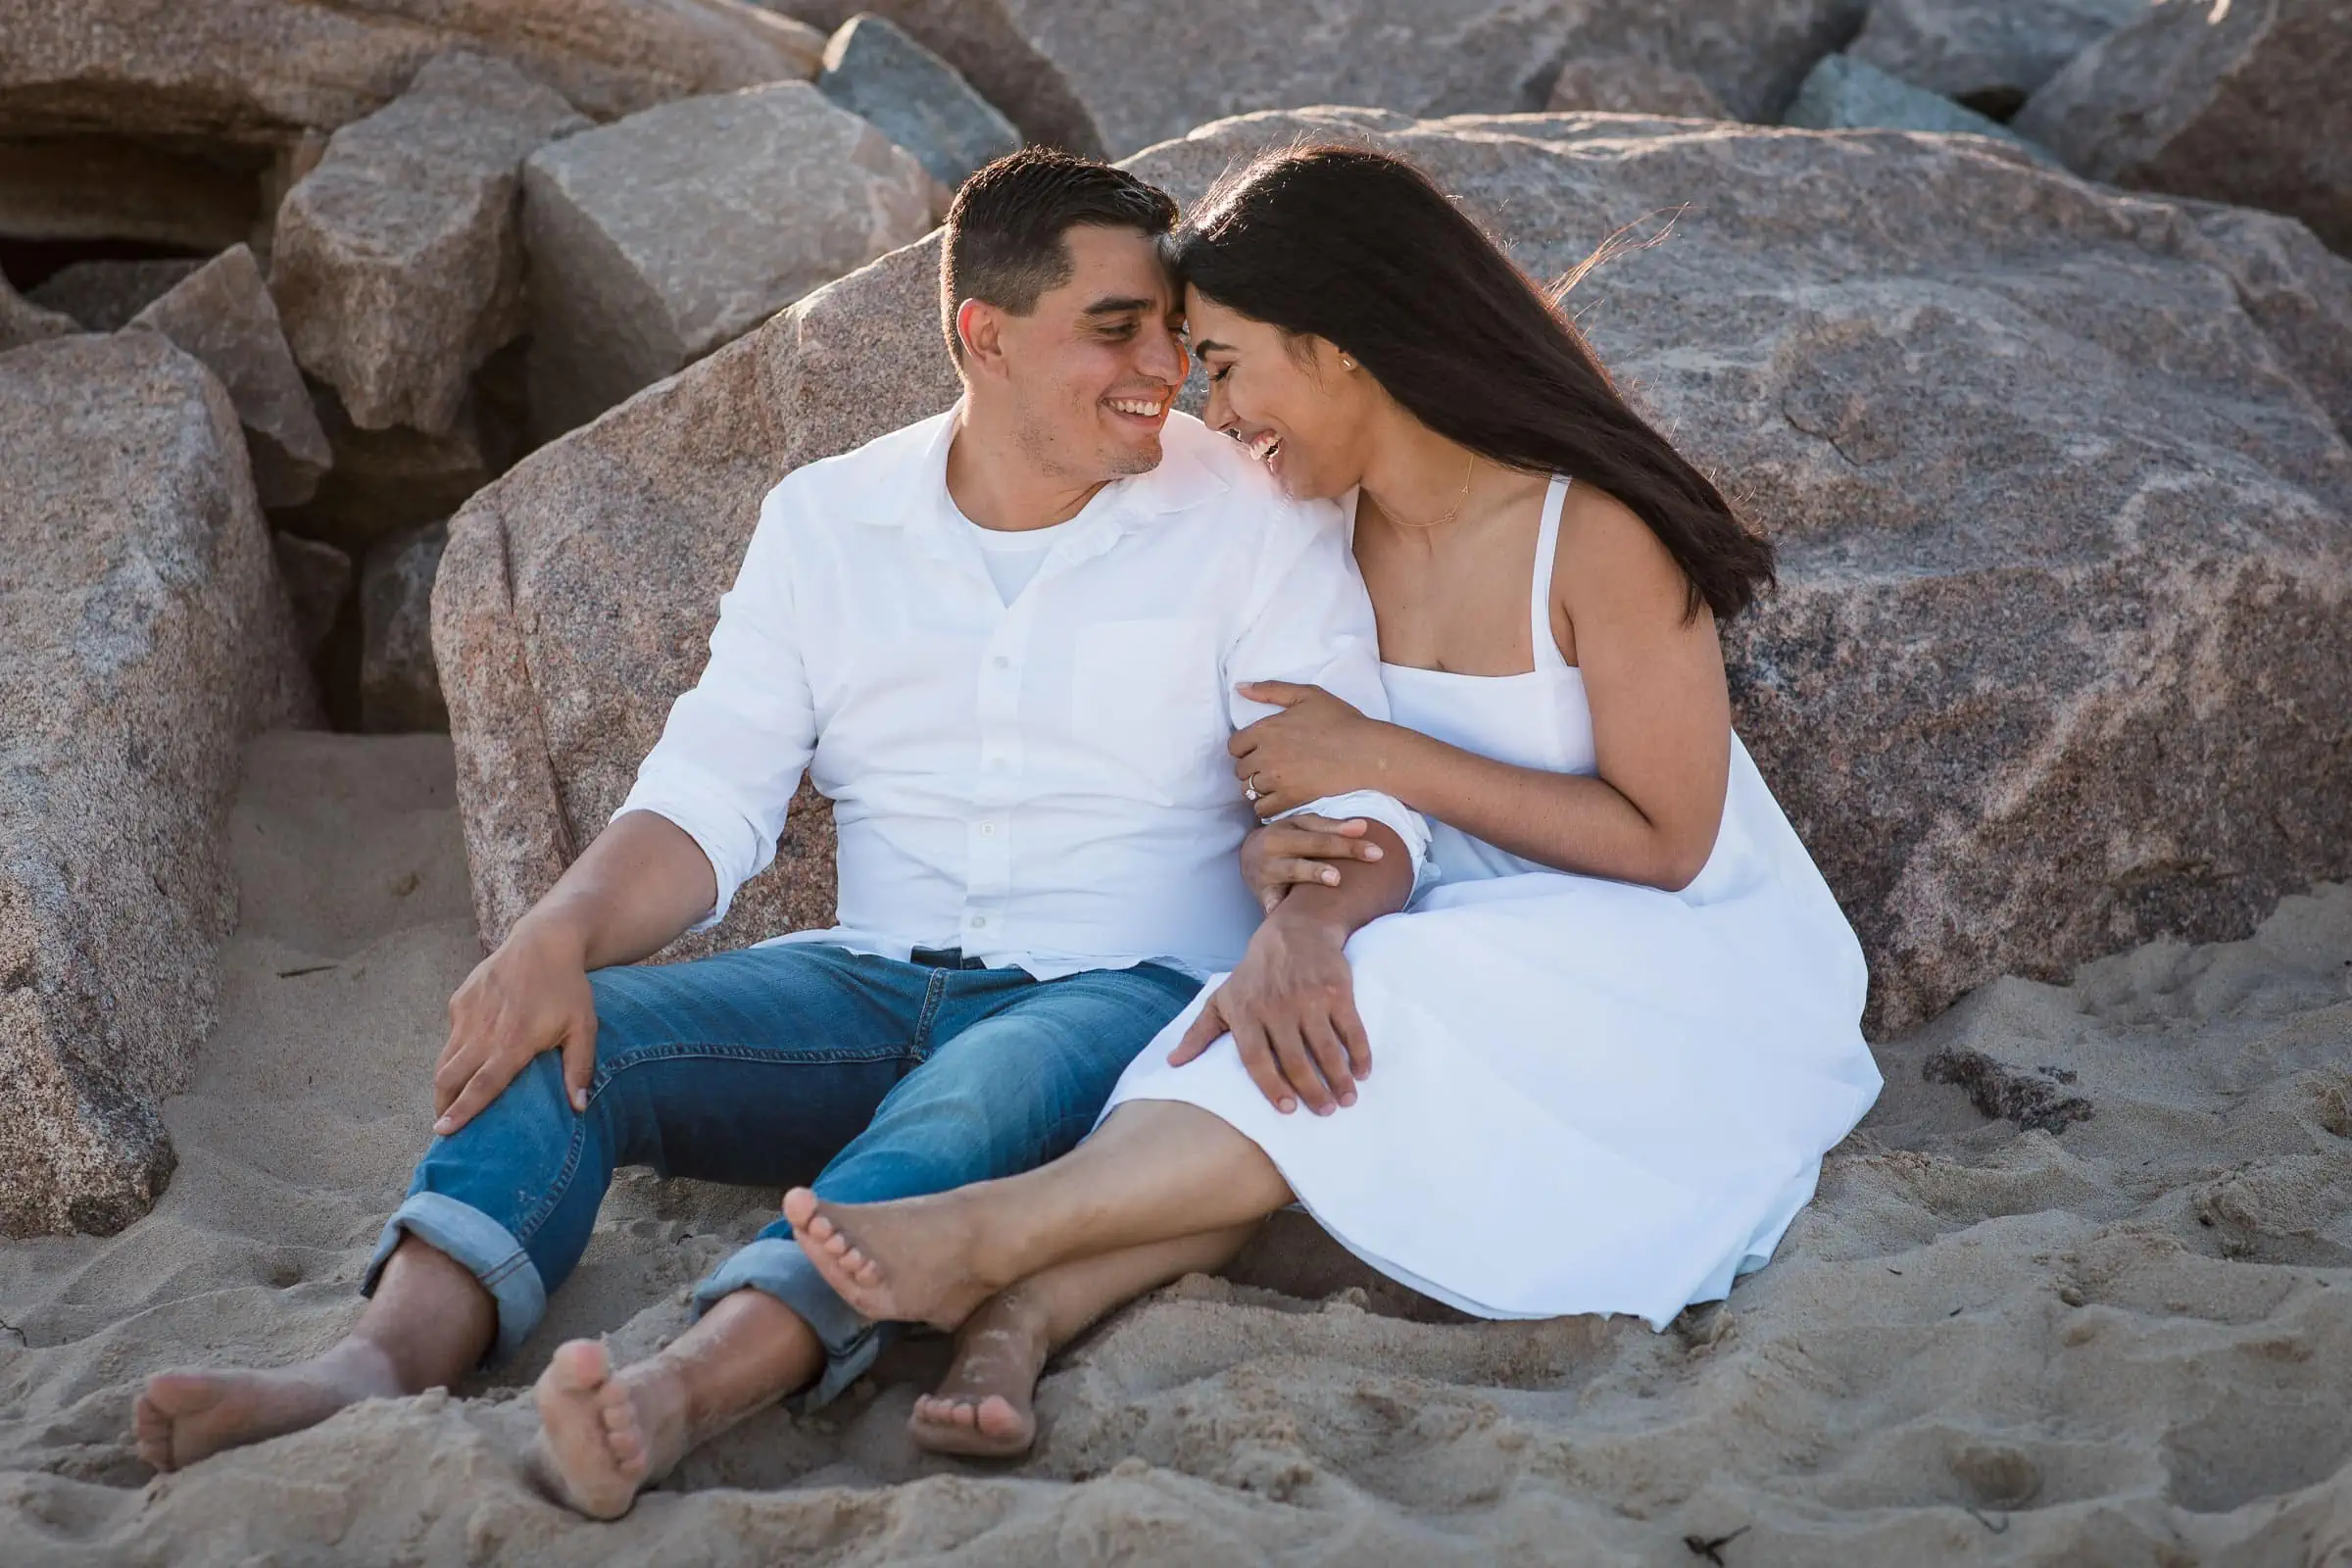 A man and woman sit in the sand laughing as the woman holds the mans arm